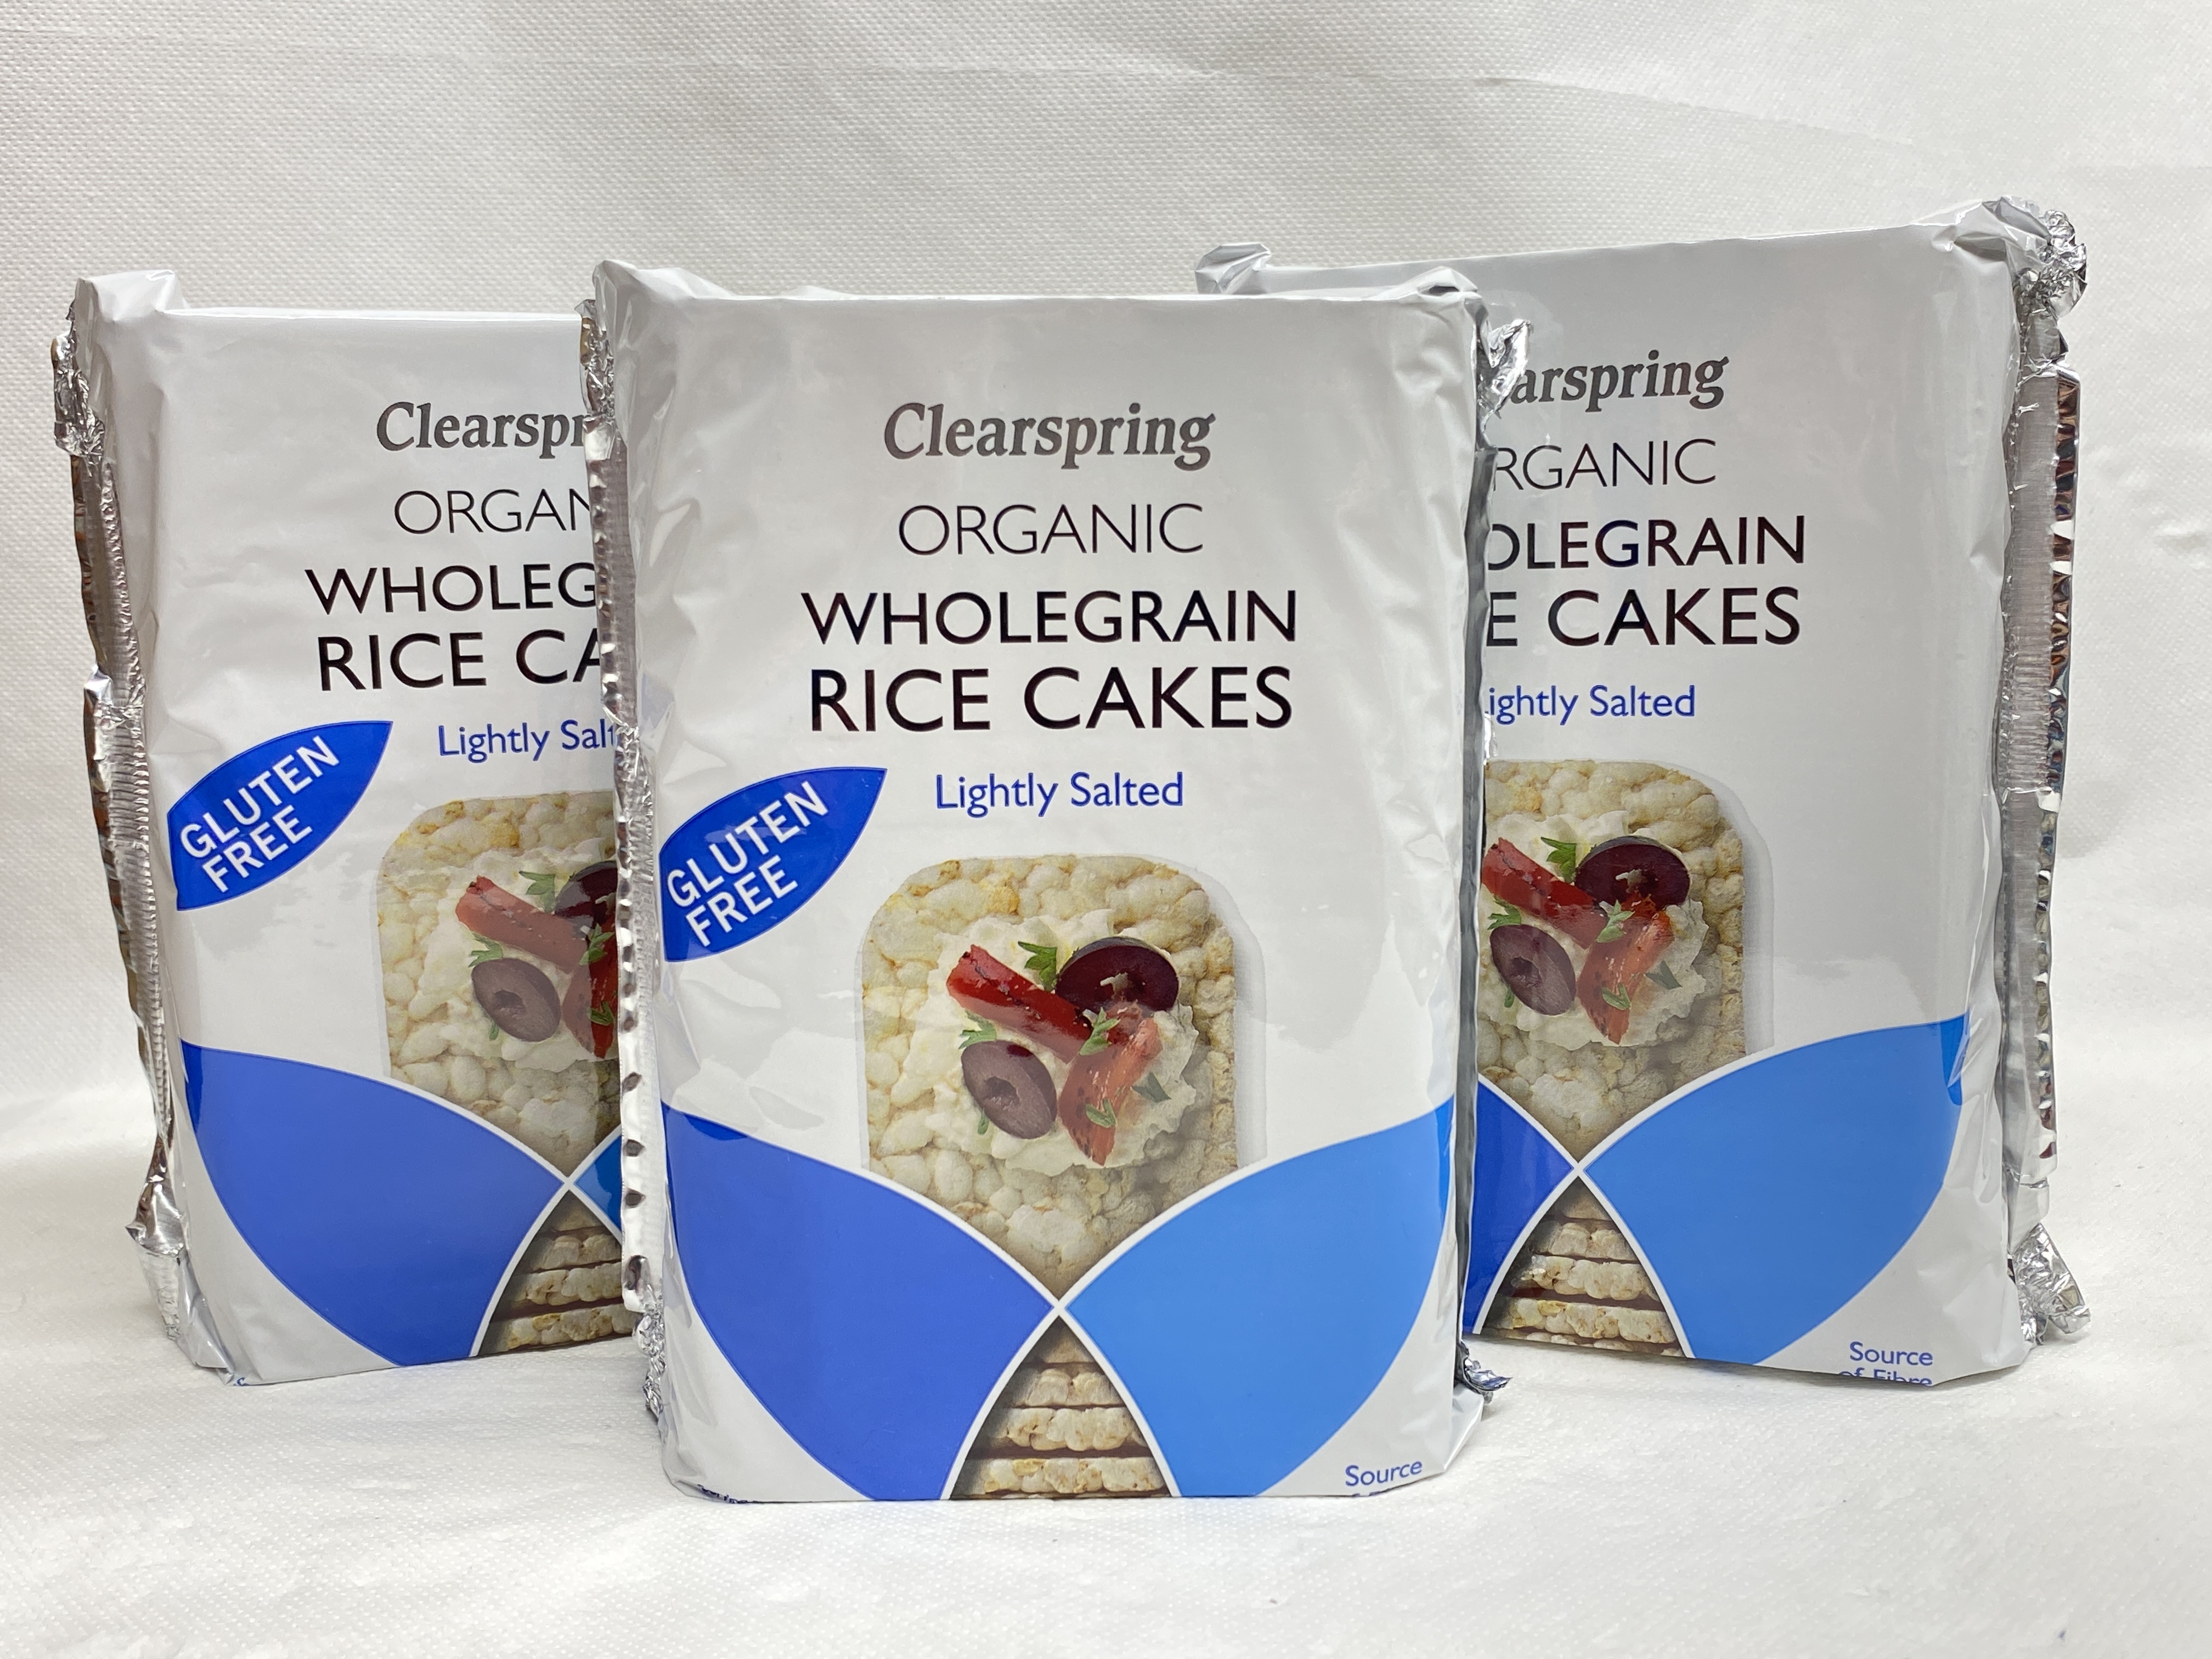 Clearspring Organic Brown Rice Crackers 40 g - Digestives Biscuits -  Biscuits & Crackers - Pantry - Products - Supermercado Apolónia